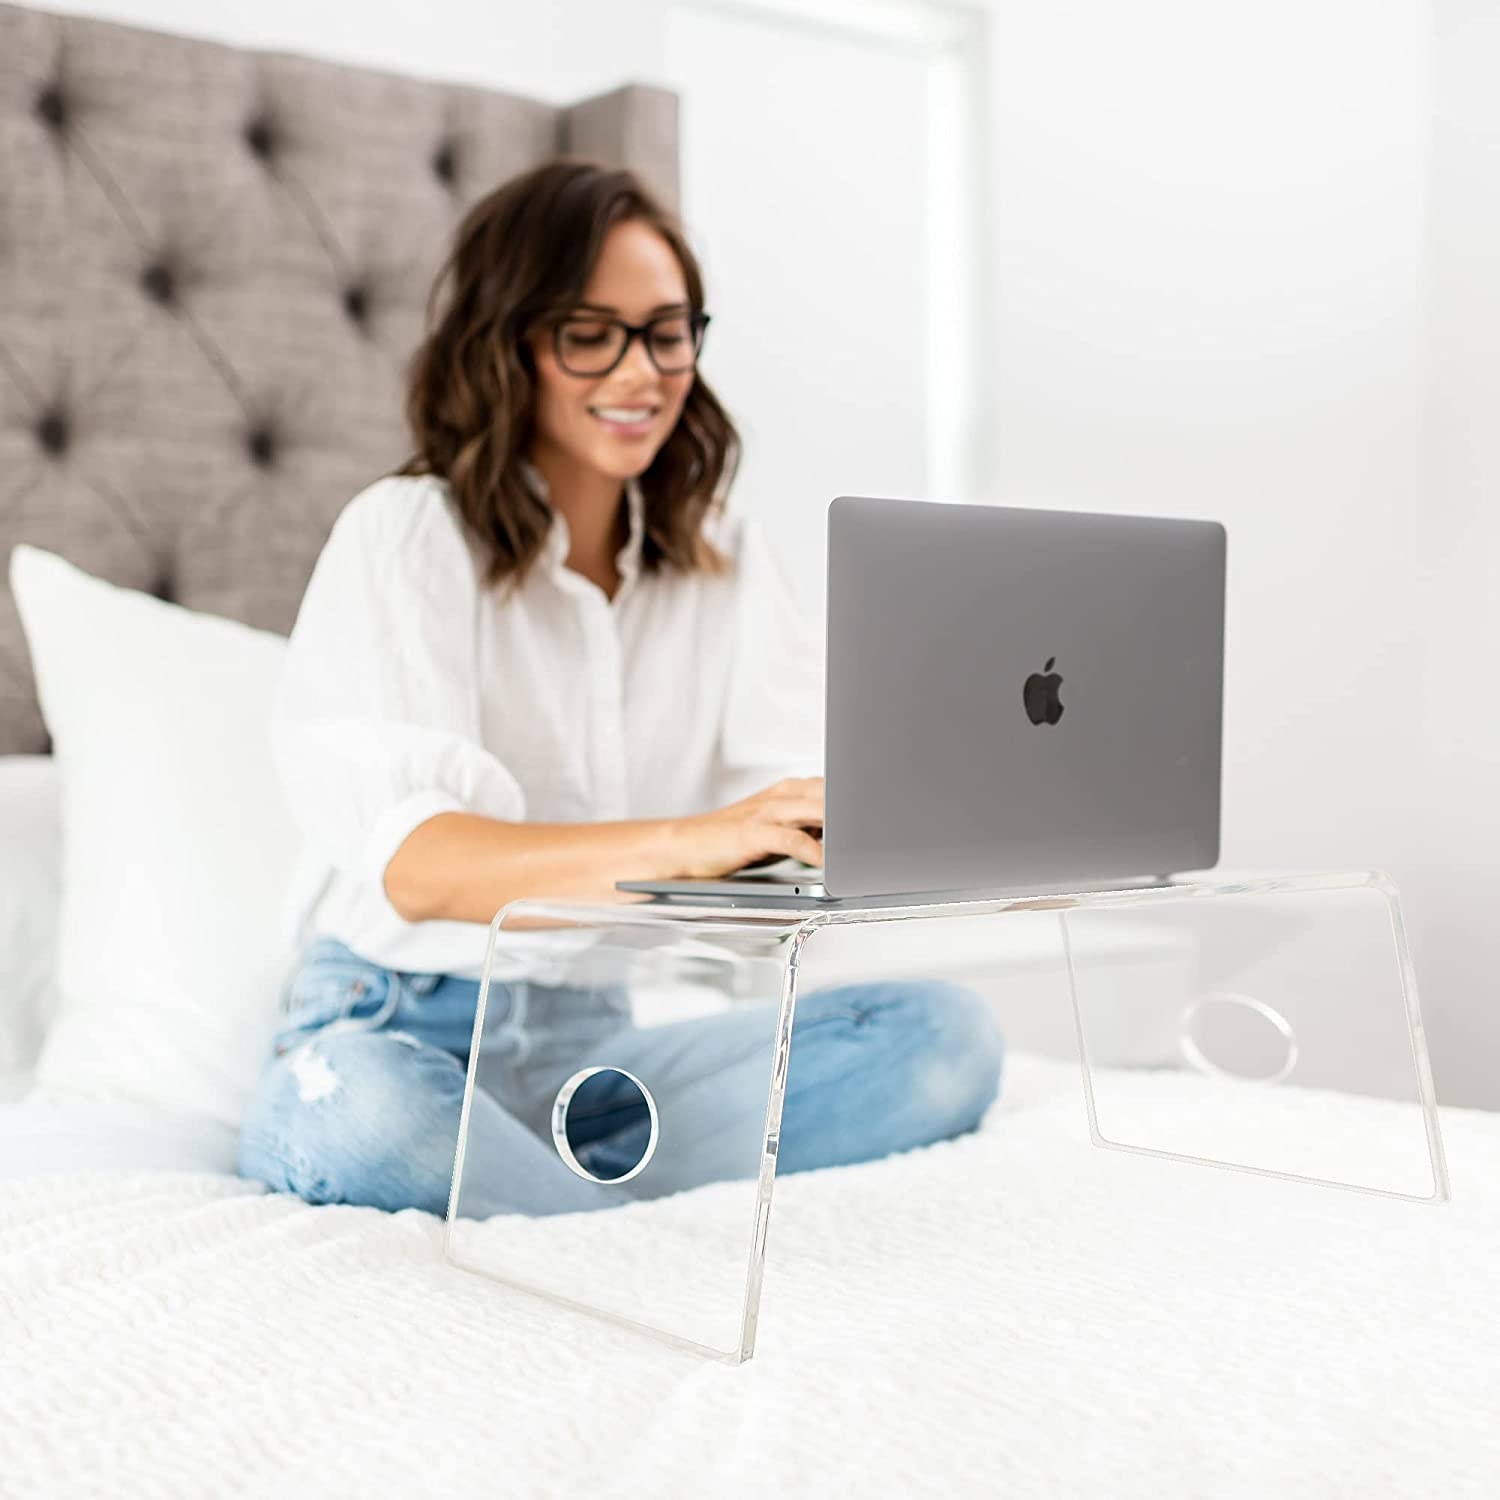 Model is sitting on a bed with a clear acrylic laptop table and a laptop on top of it